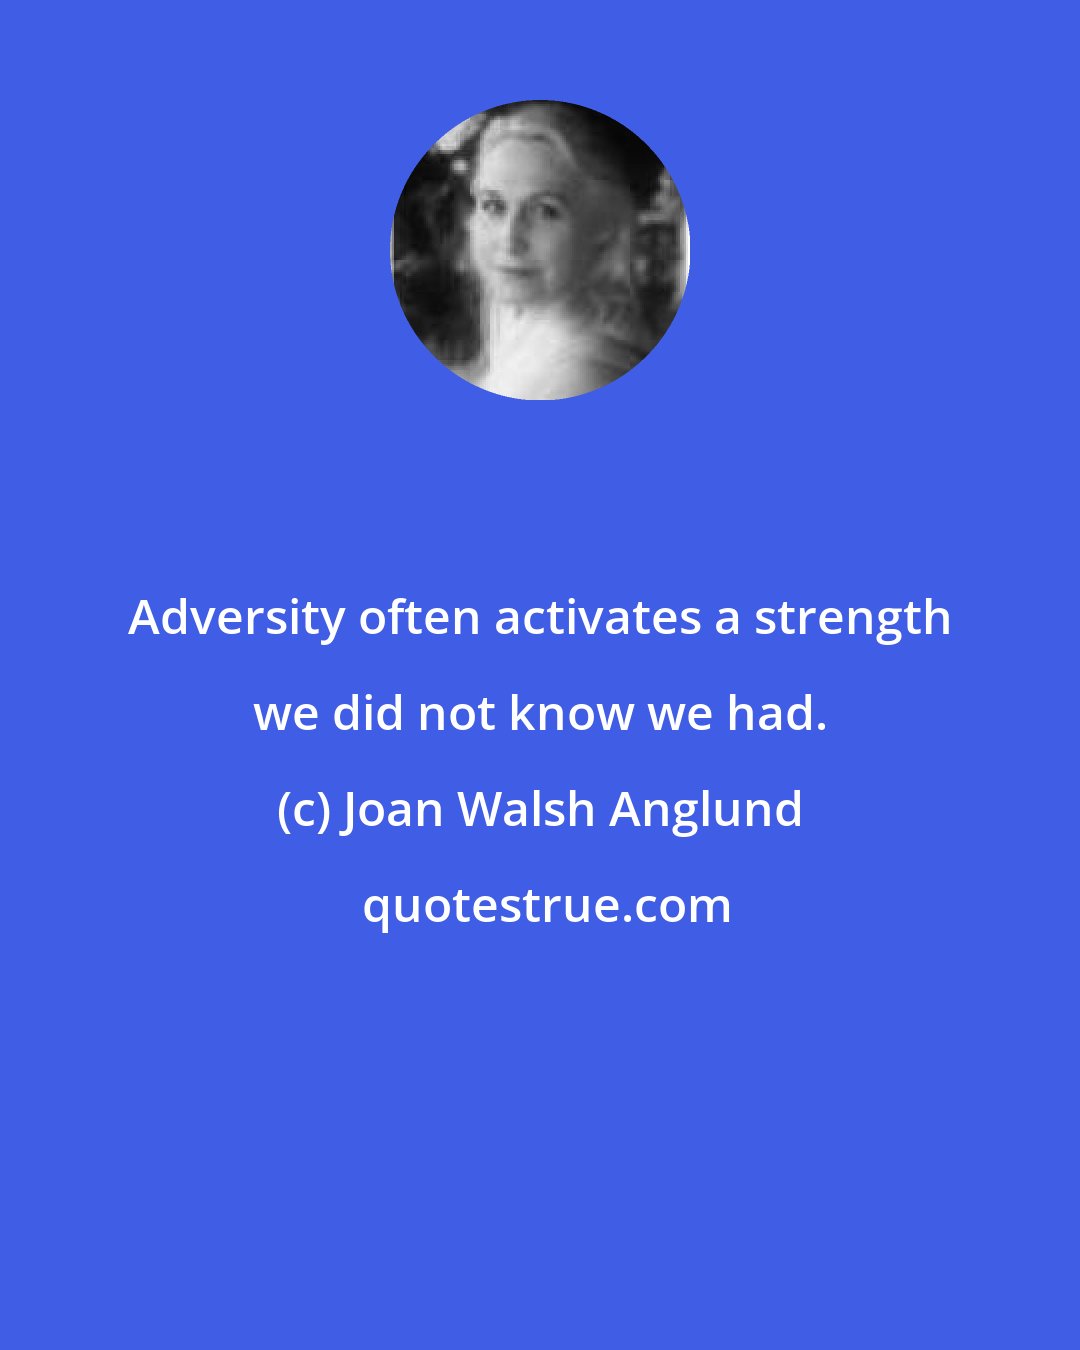 Joan Walsh Anglund: Adversity often activates a strength we did not know we had.